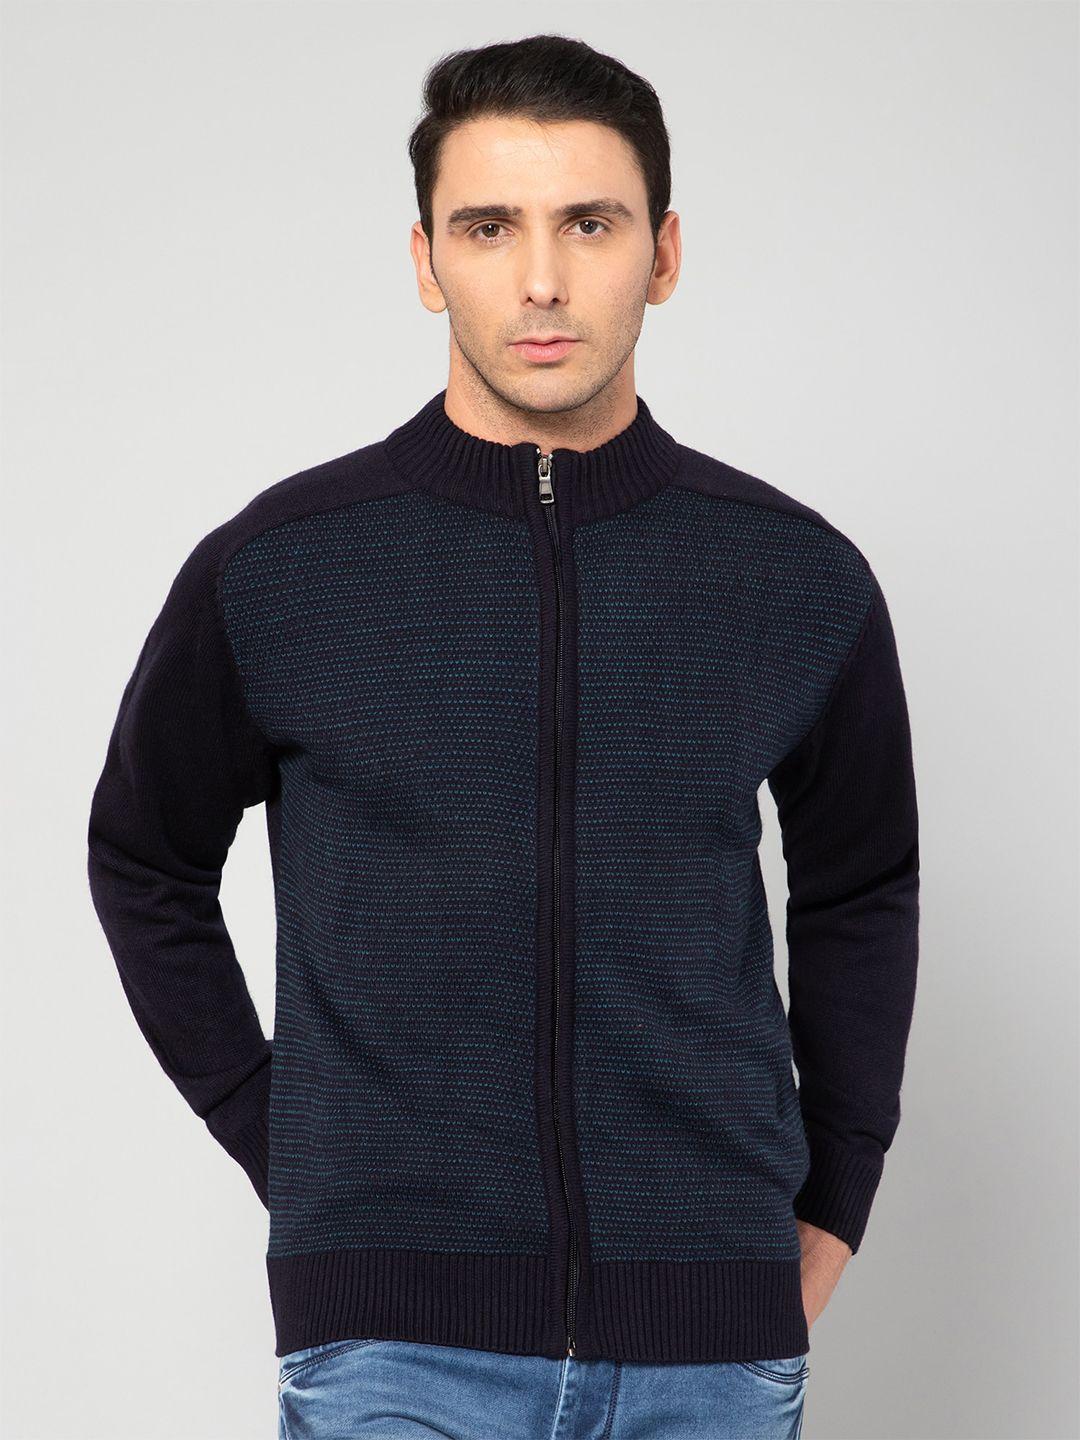 cantabil men navy blue & black ribbed acrylic cardigan with zip detail